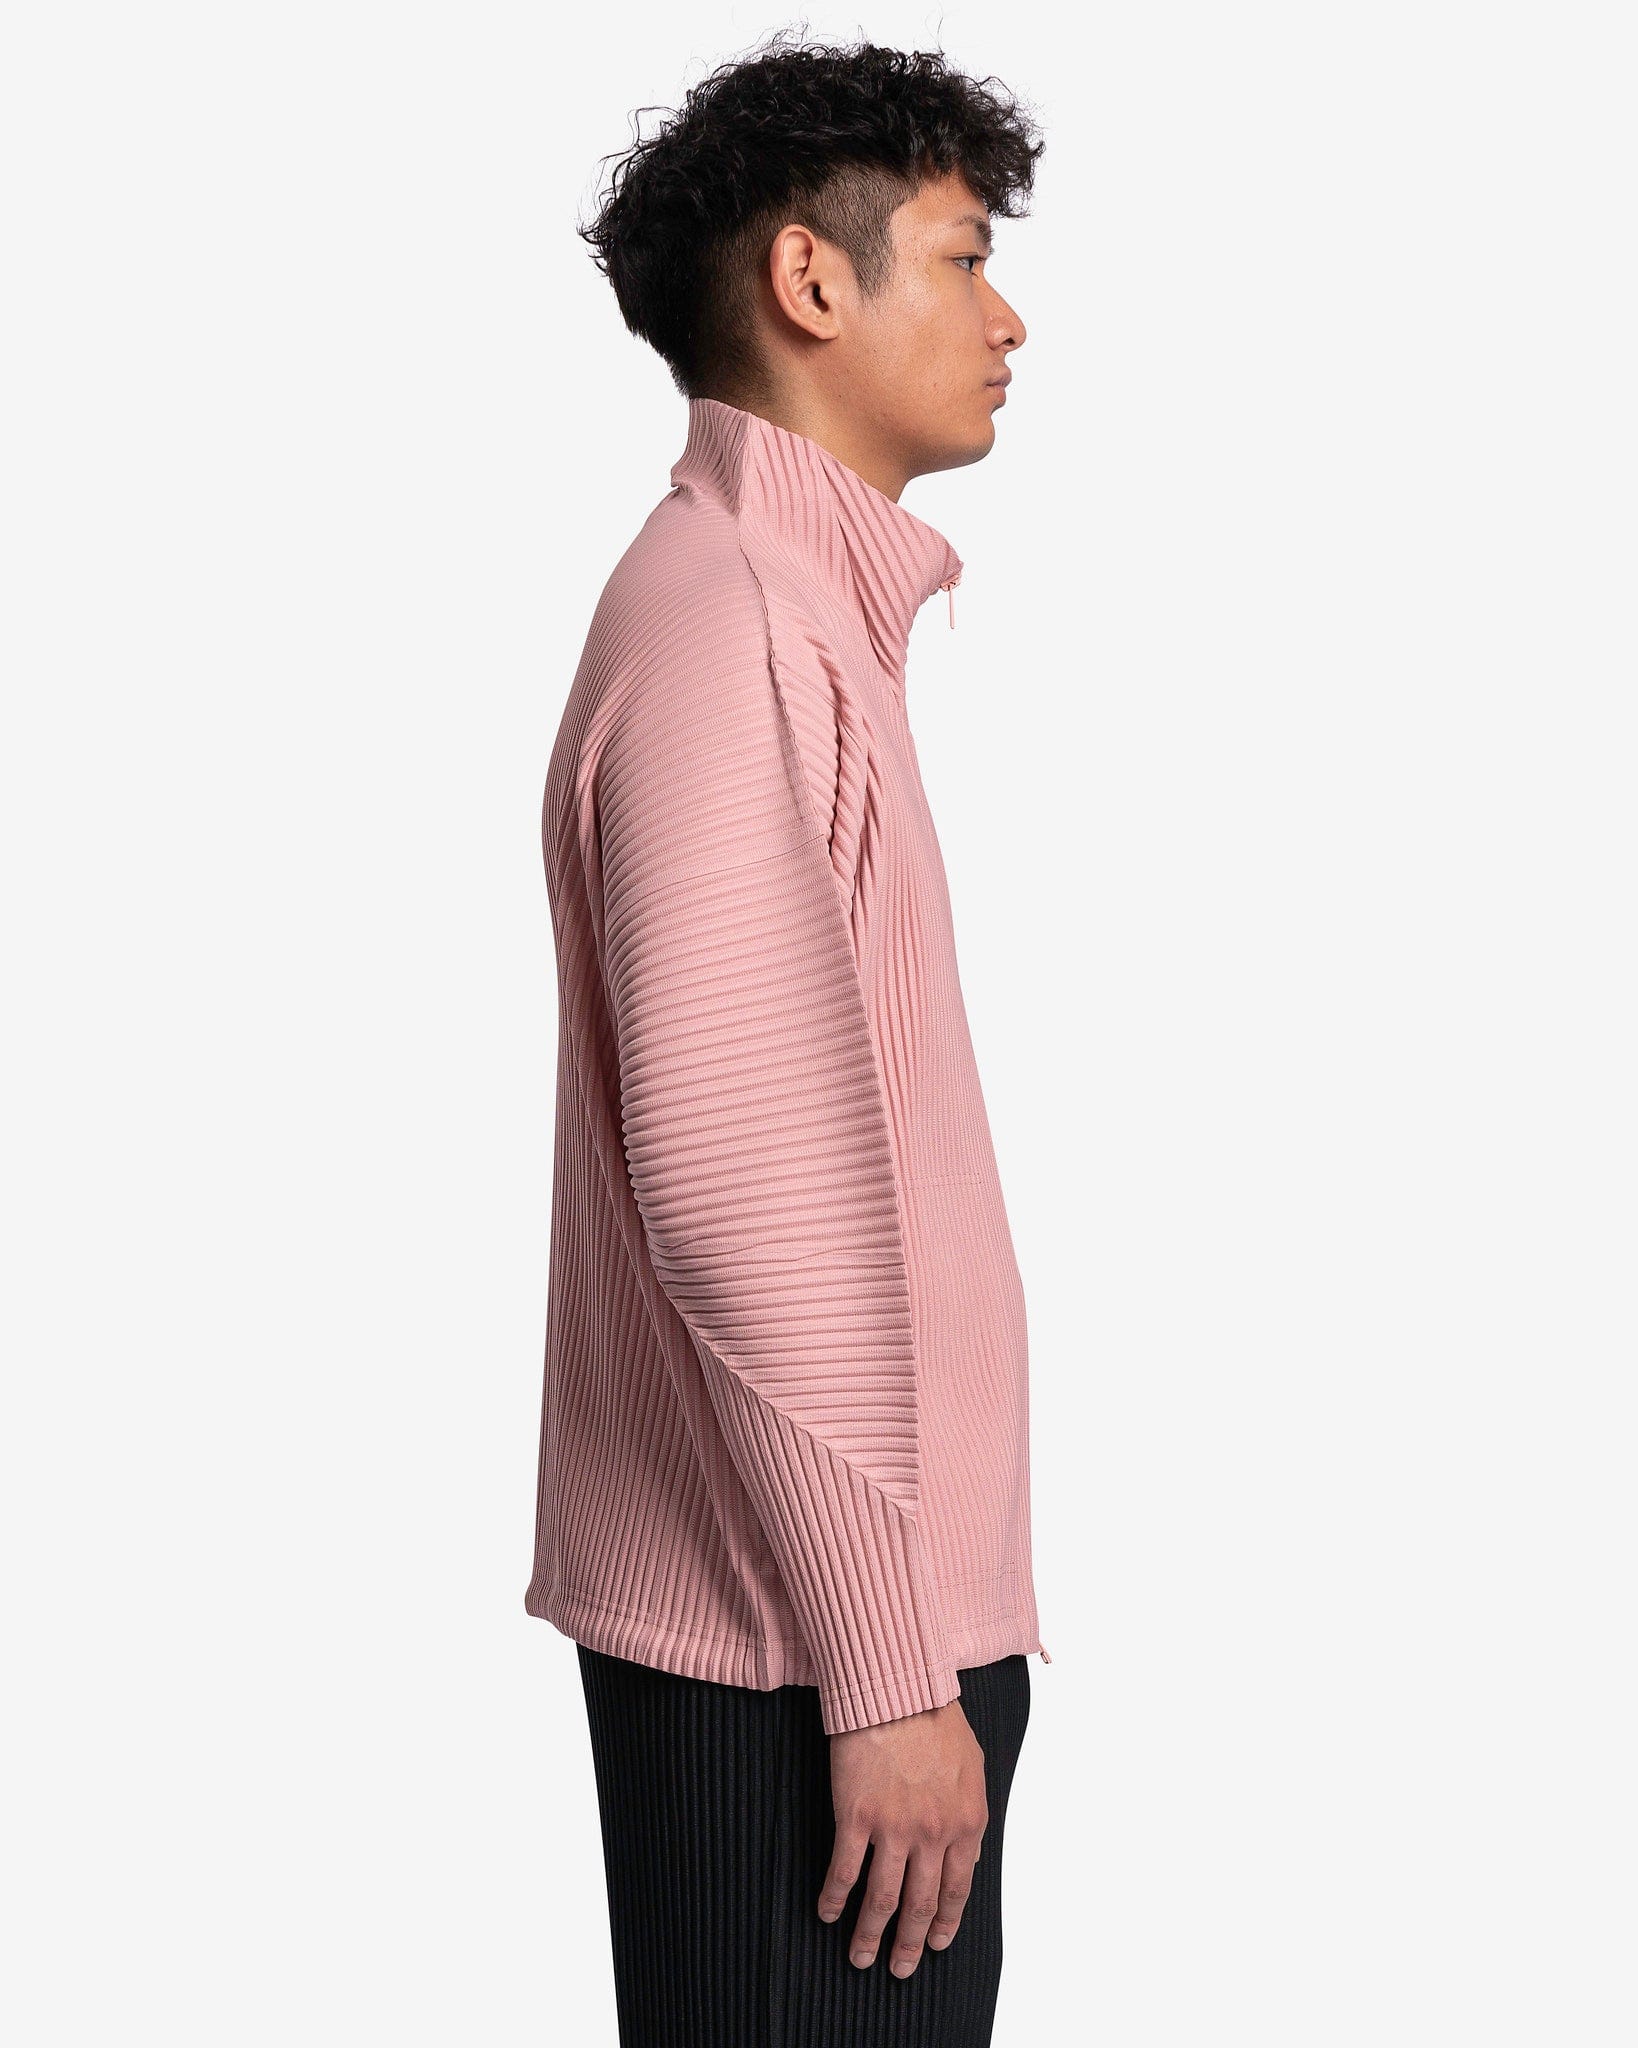 Homme Plissé Issey Miyake Men's Jackets MC April Jacket in Coral Red